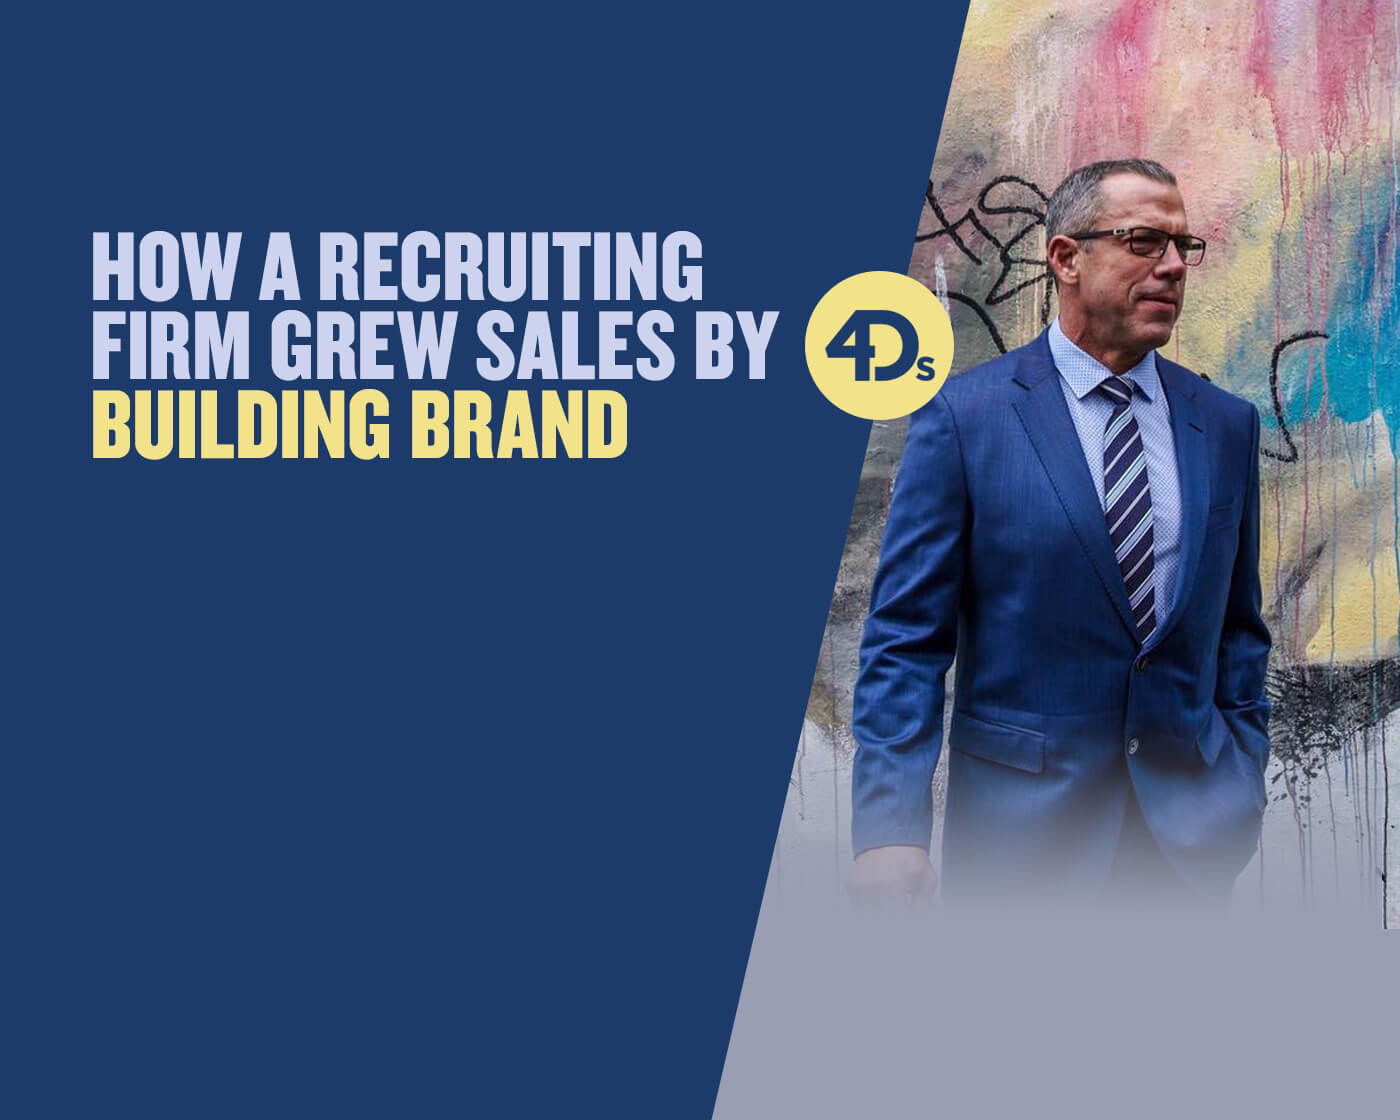 Post 4Ds: How a Recruiting Firm Grew Sales By Building Brand